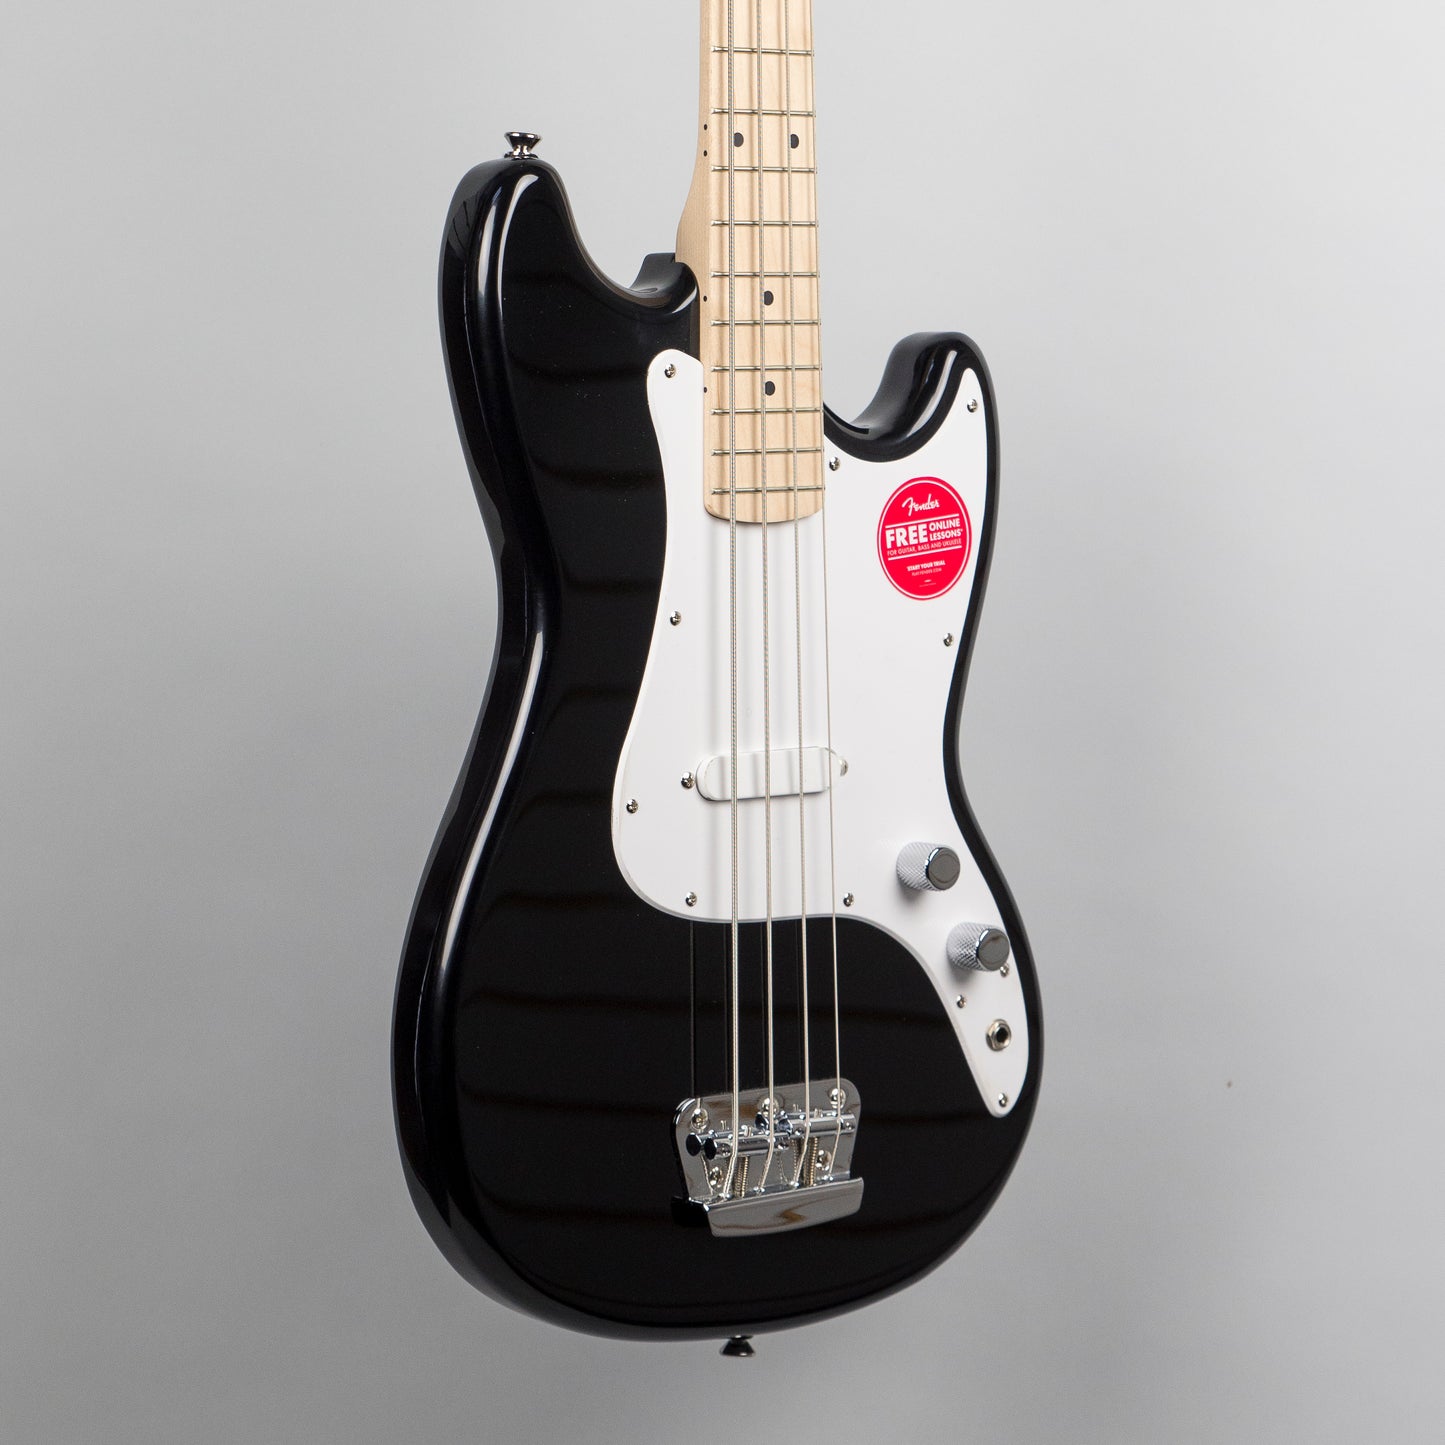 Squier Affinity Series Bronco Bass in Black